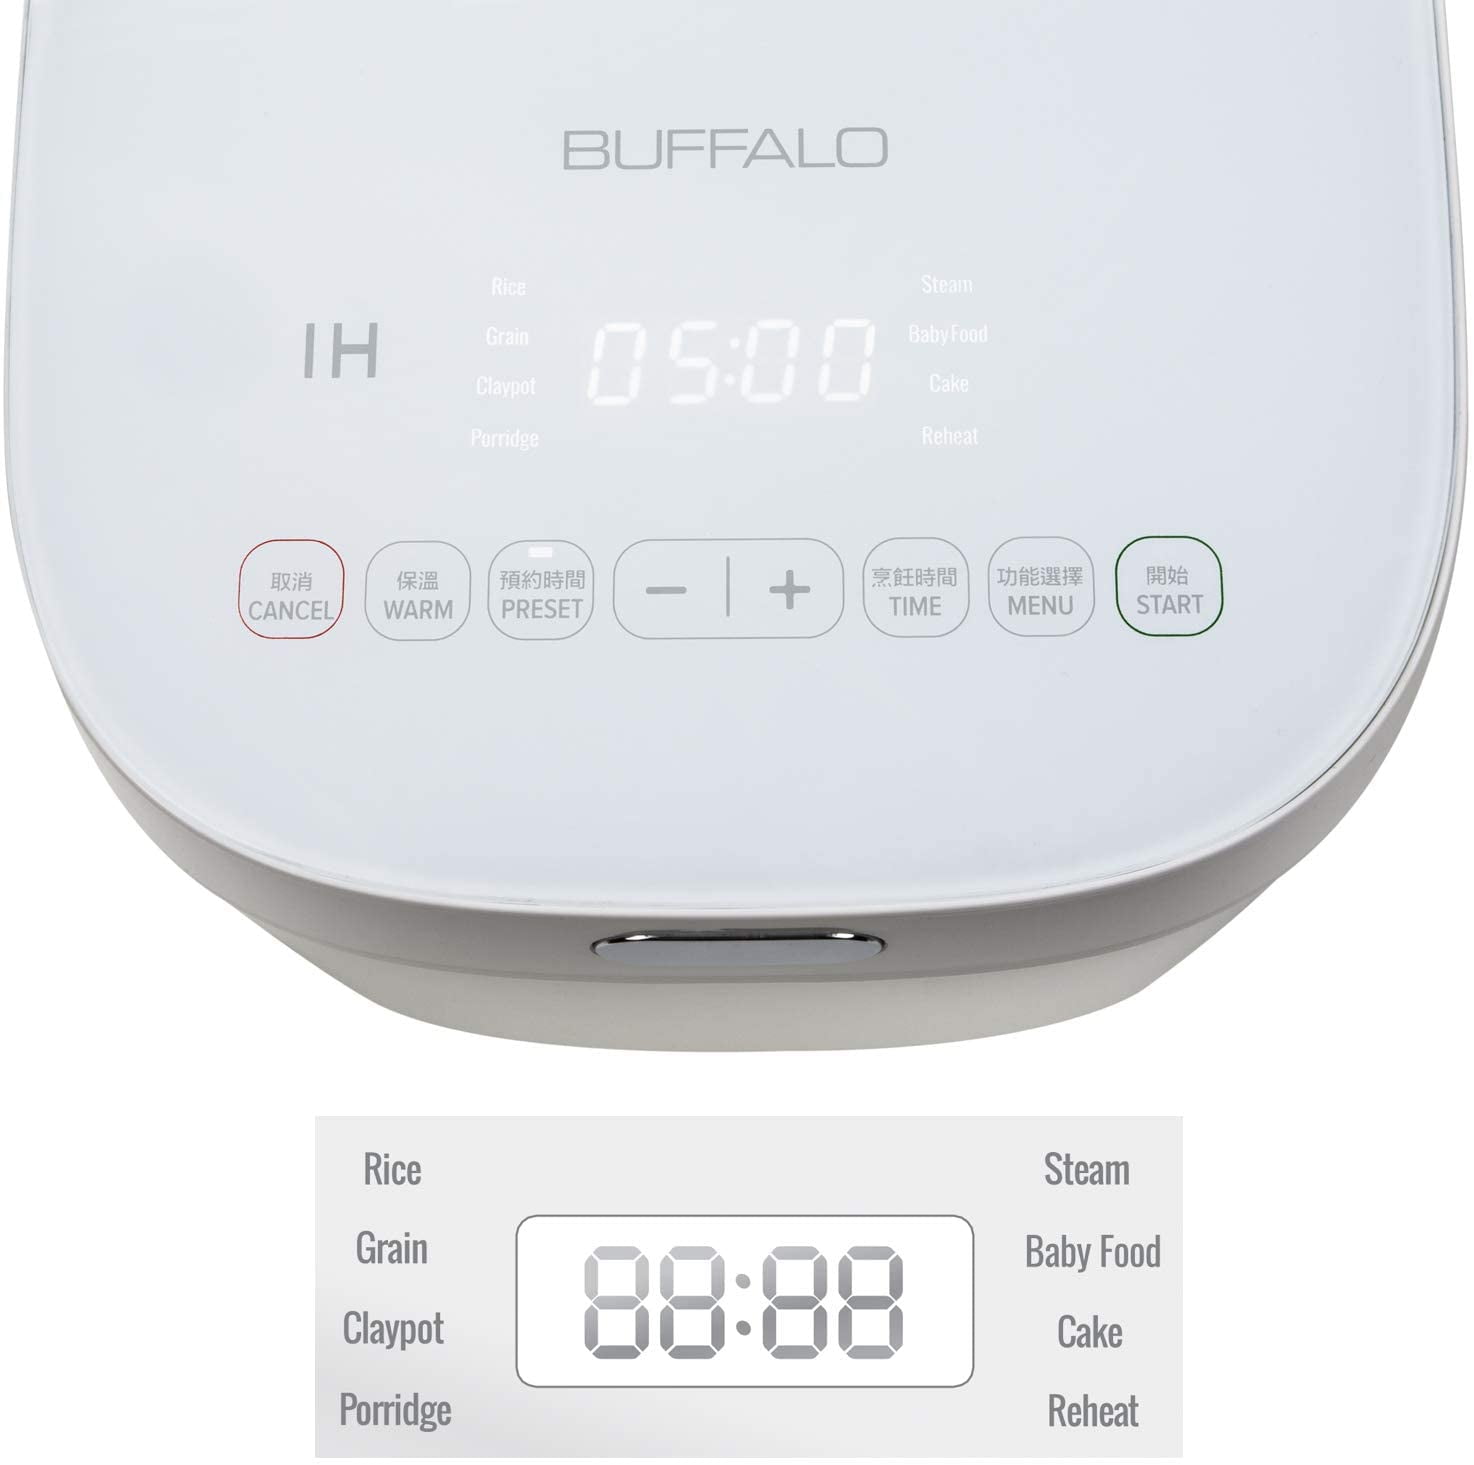 Buffalo IH Smart Stainless Steel Rice Cooker